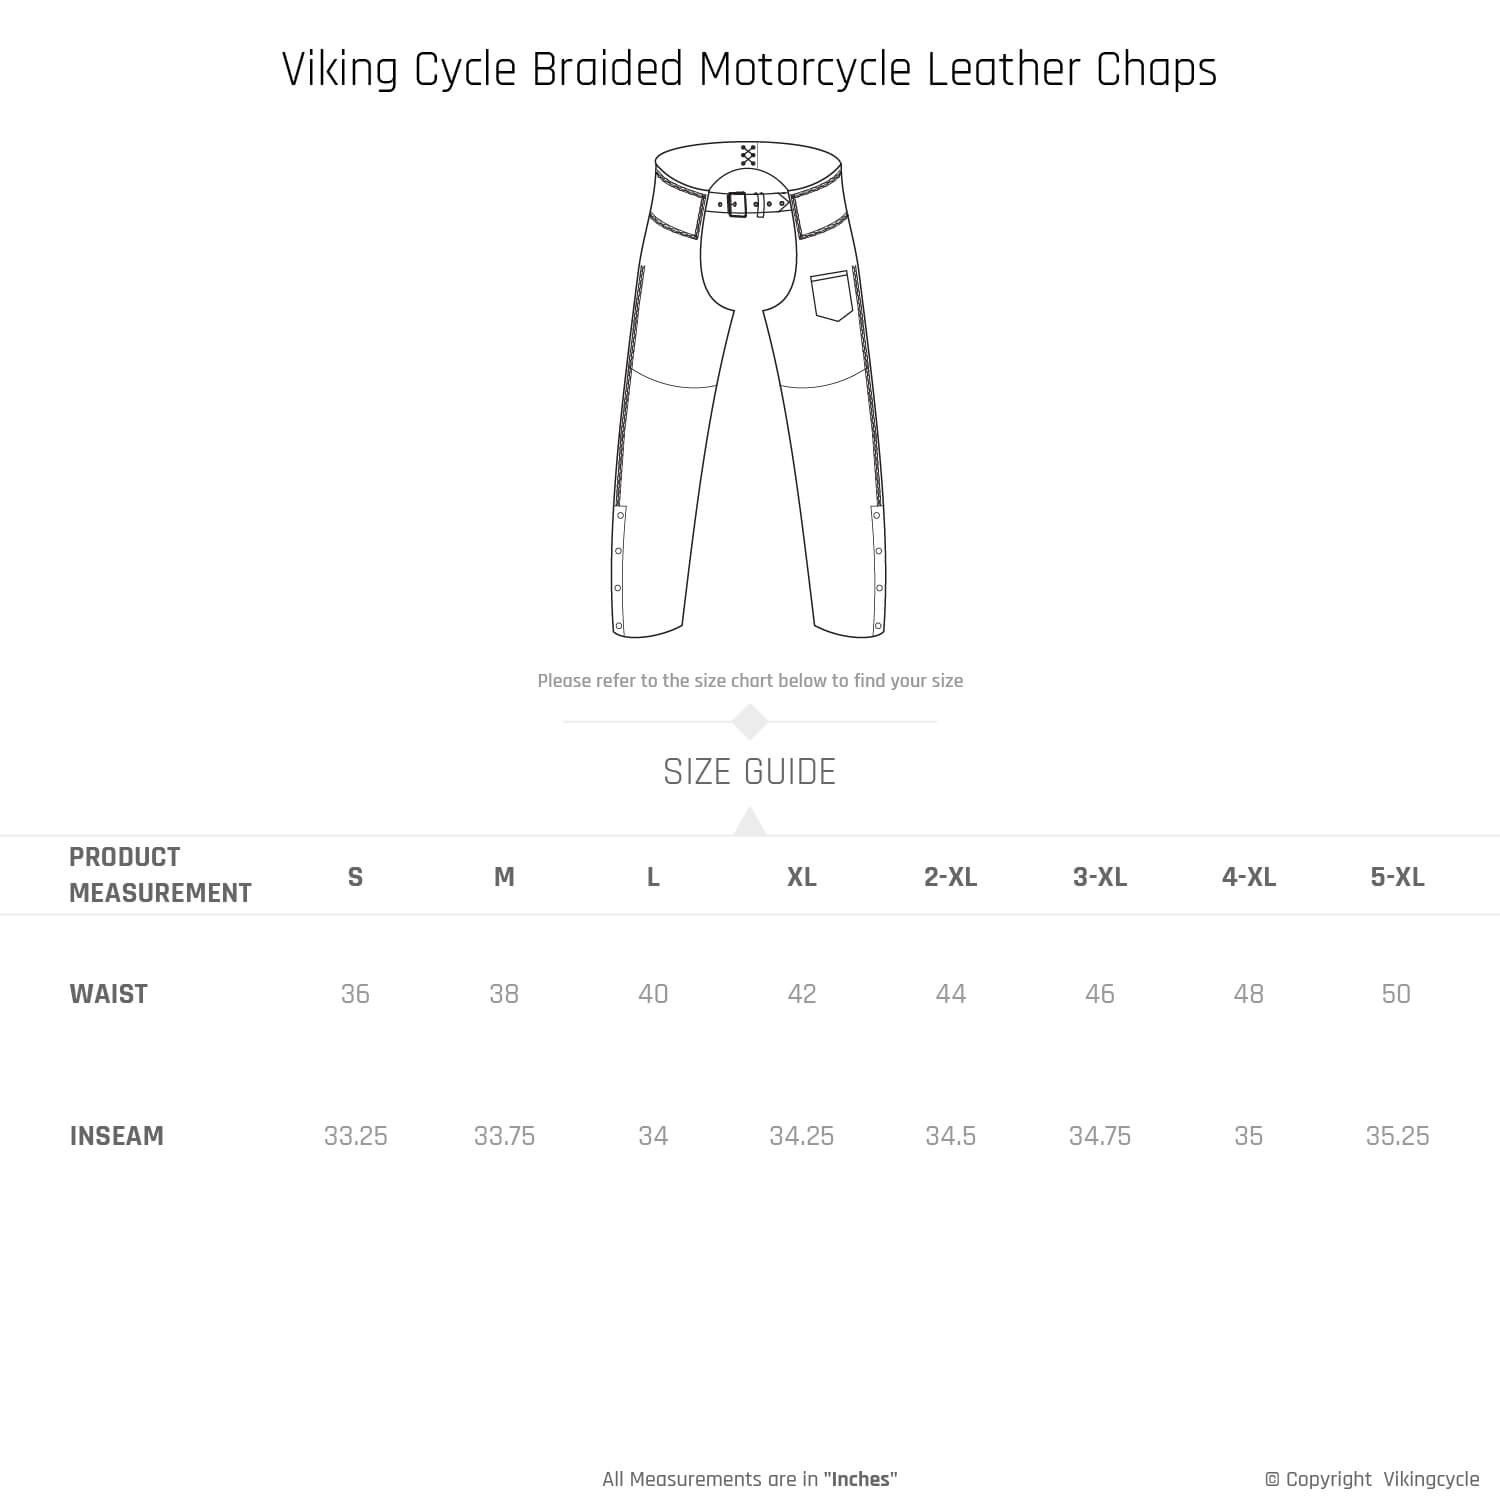 Viking Cycle Braided Motorcycle Leather Chaps